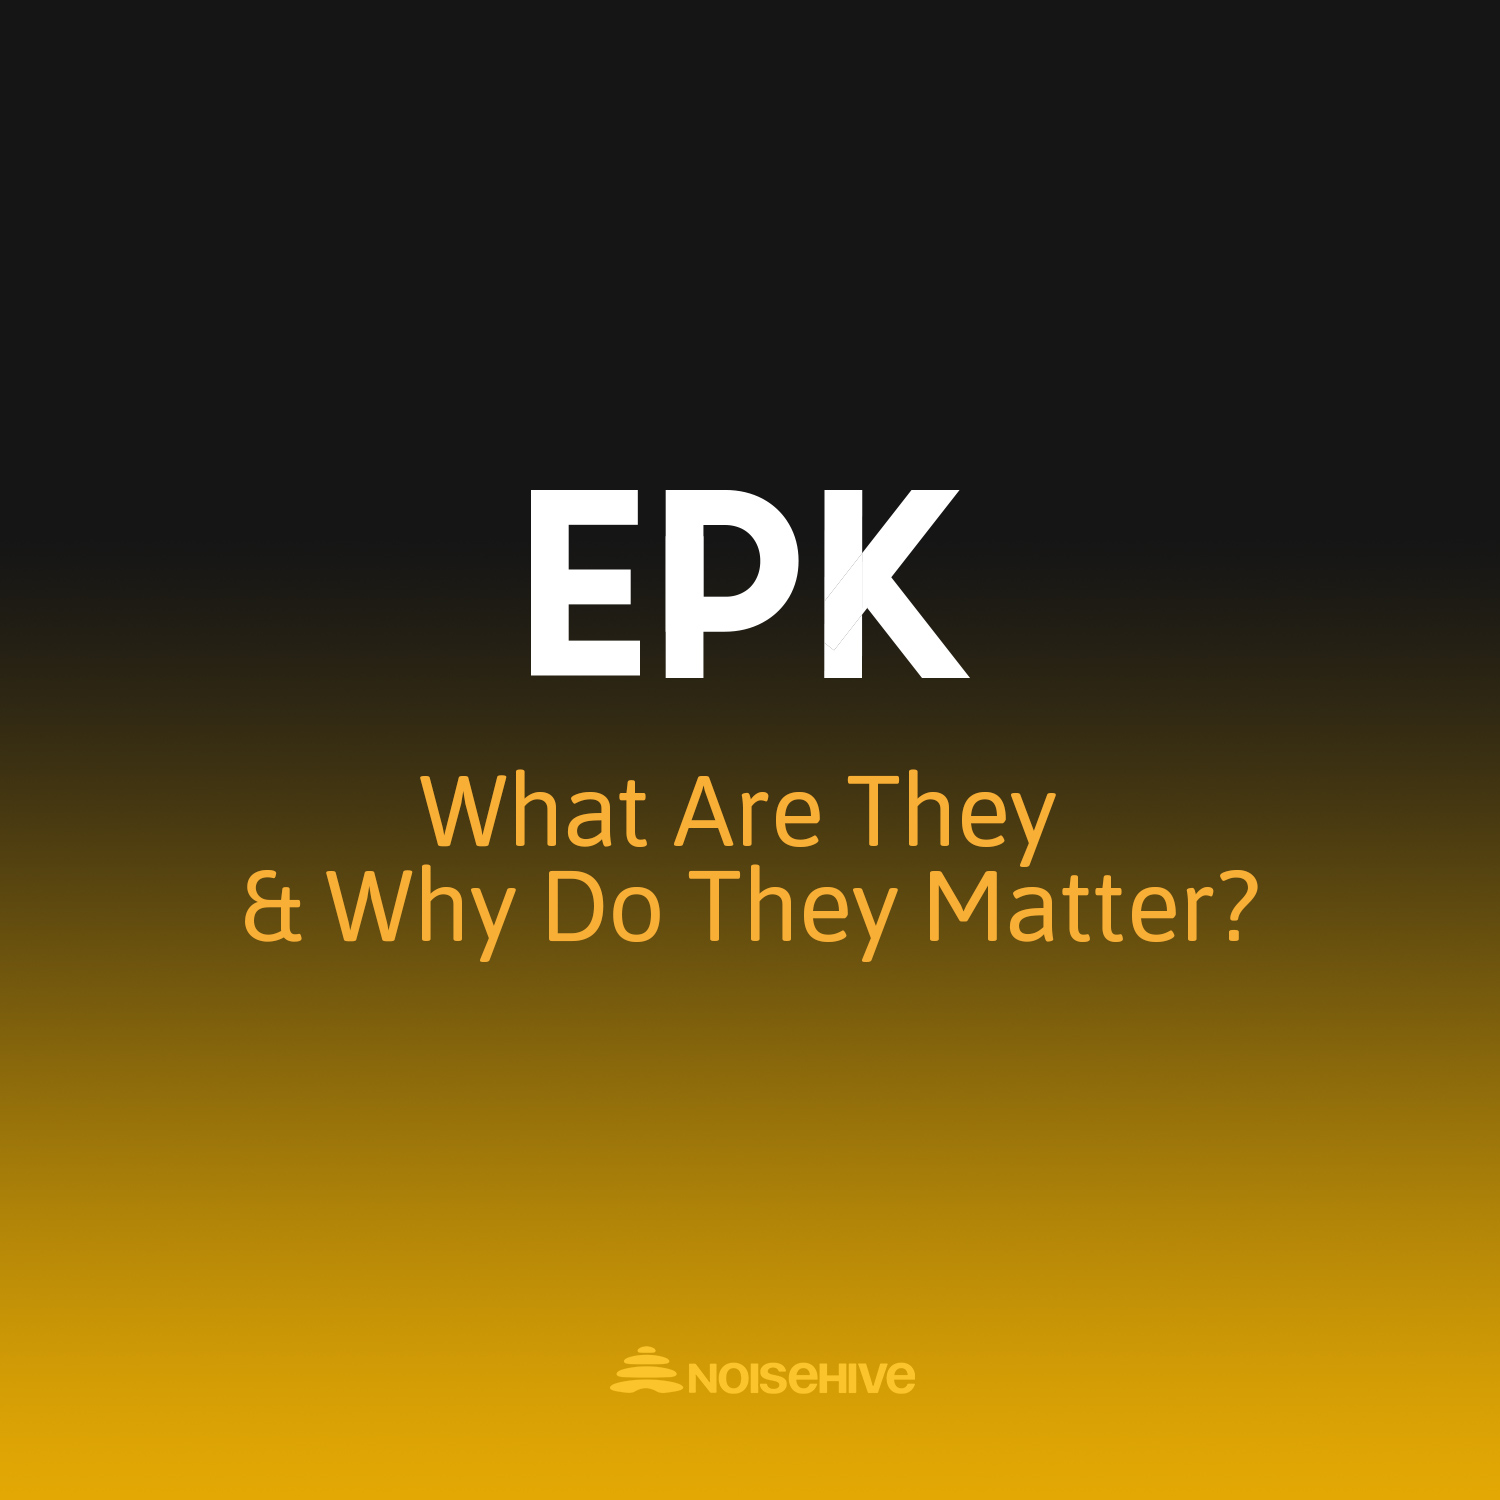 EPK- What Are They & Why Are Do They Matter?